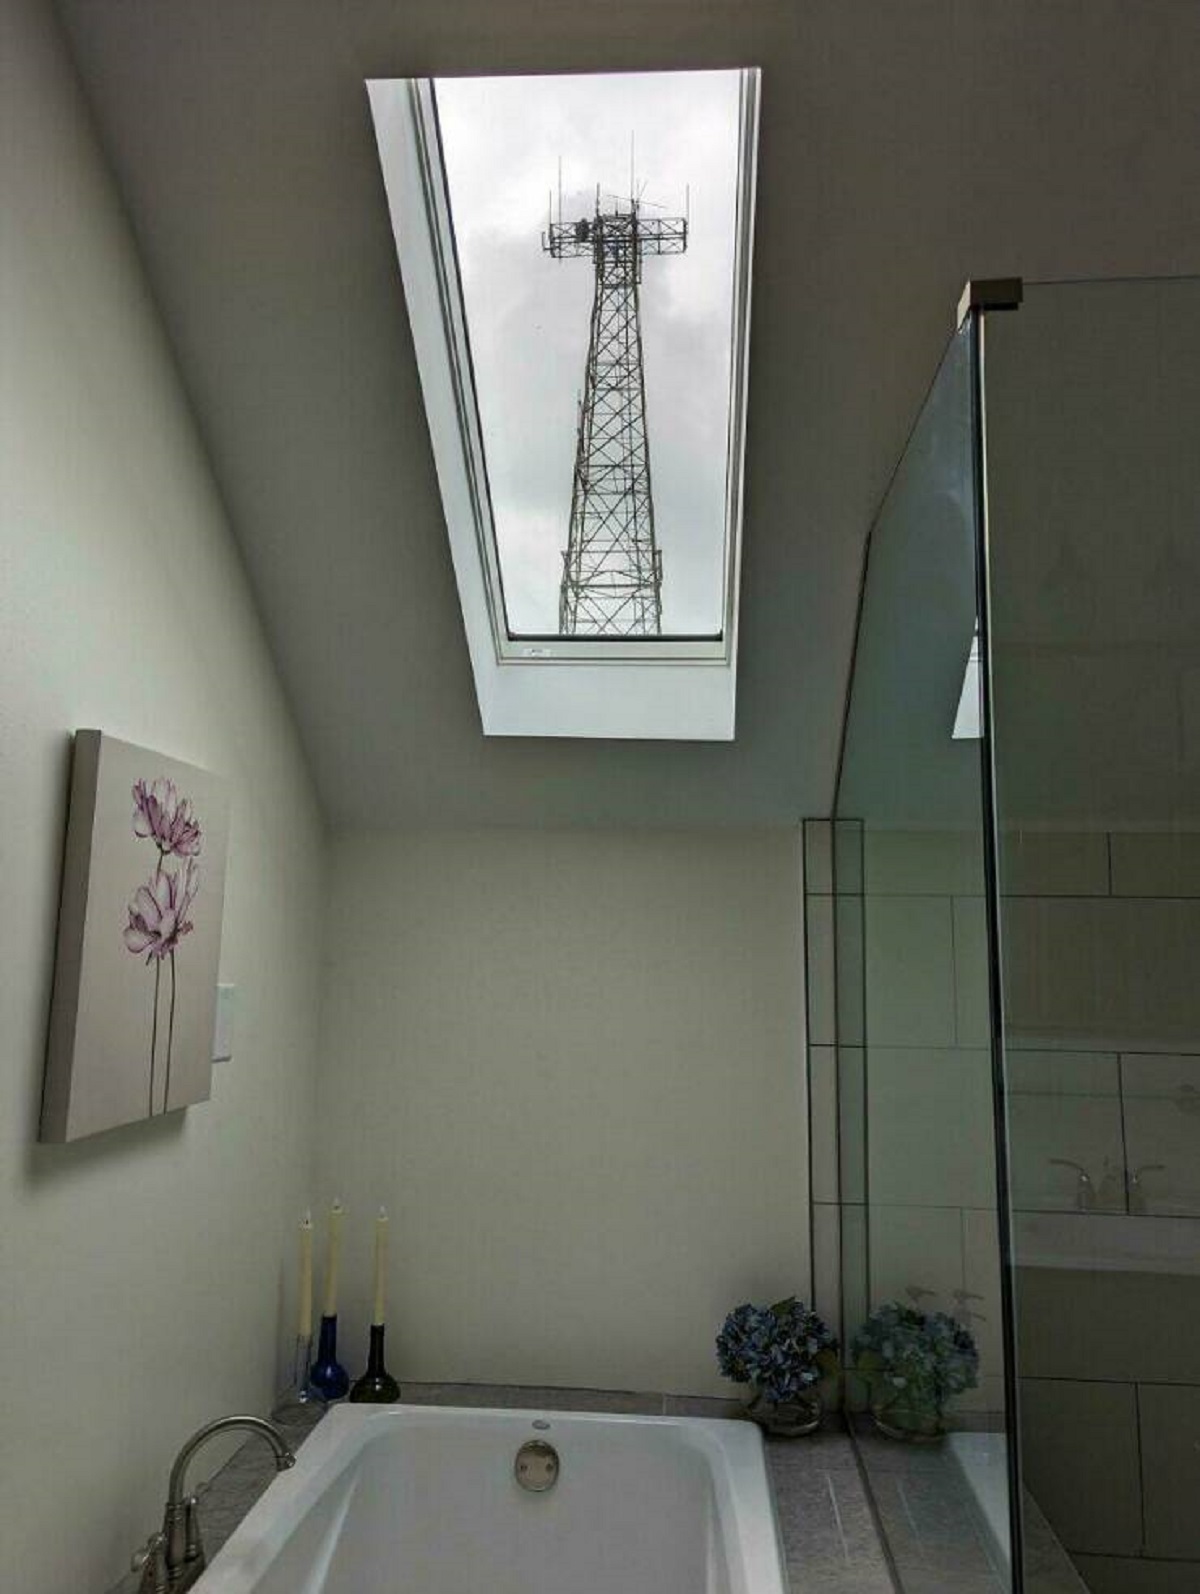 "Installed A Lovely Sunlight In My New Bathroom, Without Realizing It Would Perfectly Frame That Horrid Tower"